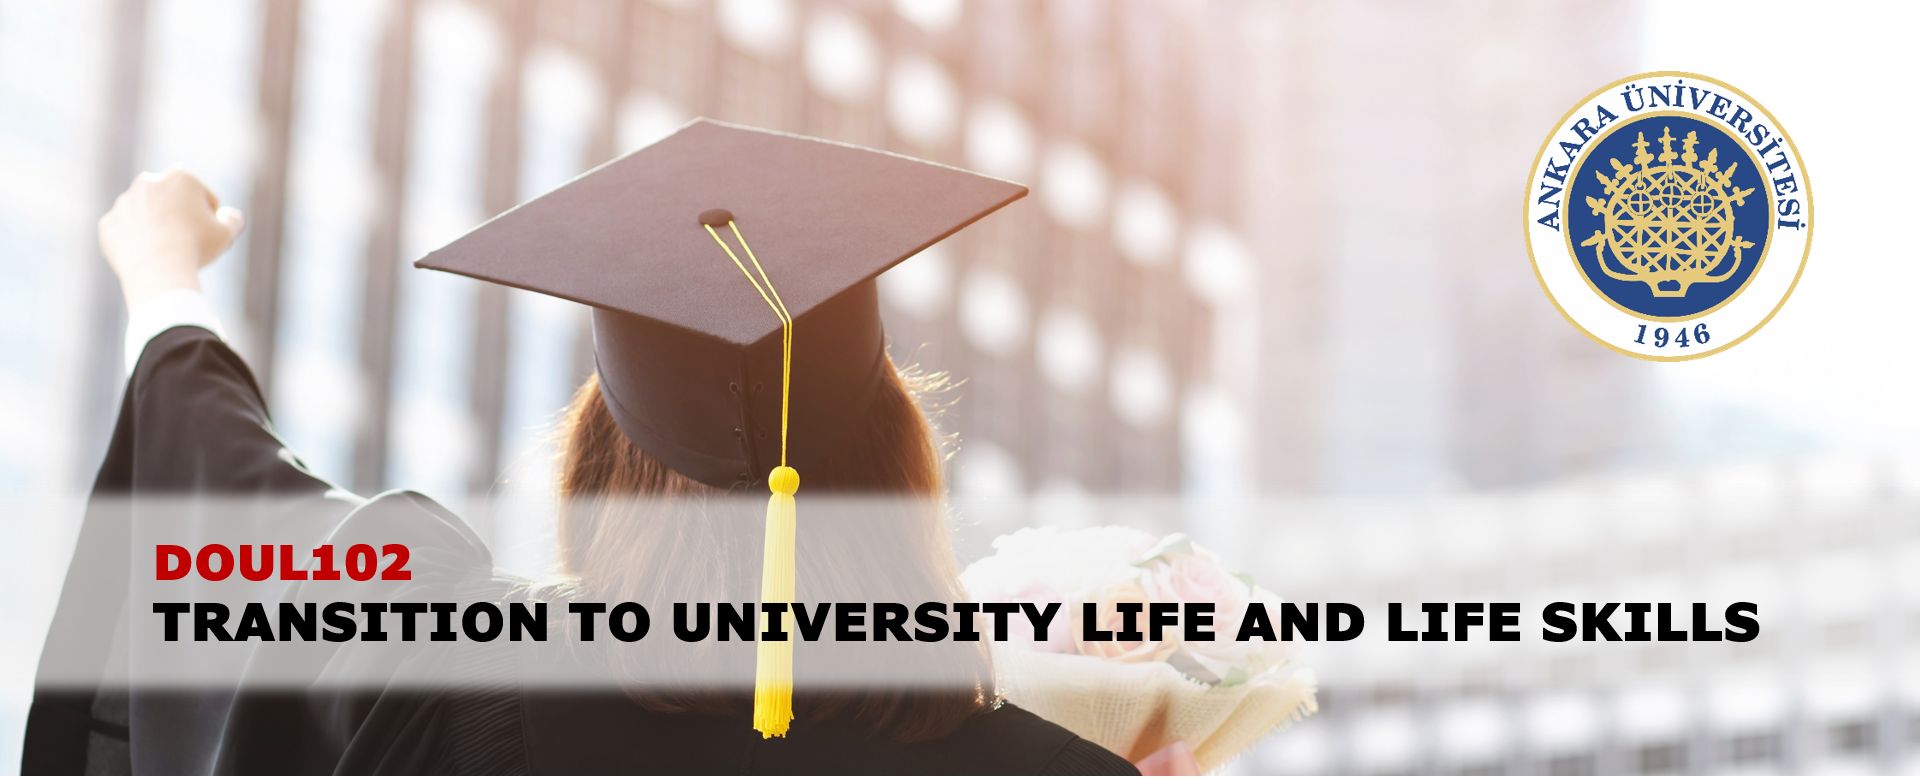 (DOUL102-İNG) TRANSITION TO UNIVERSITY LIFE AND LIFE SKILLS